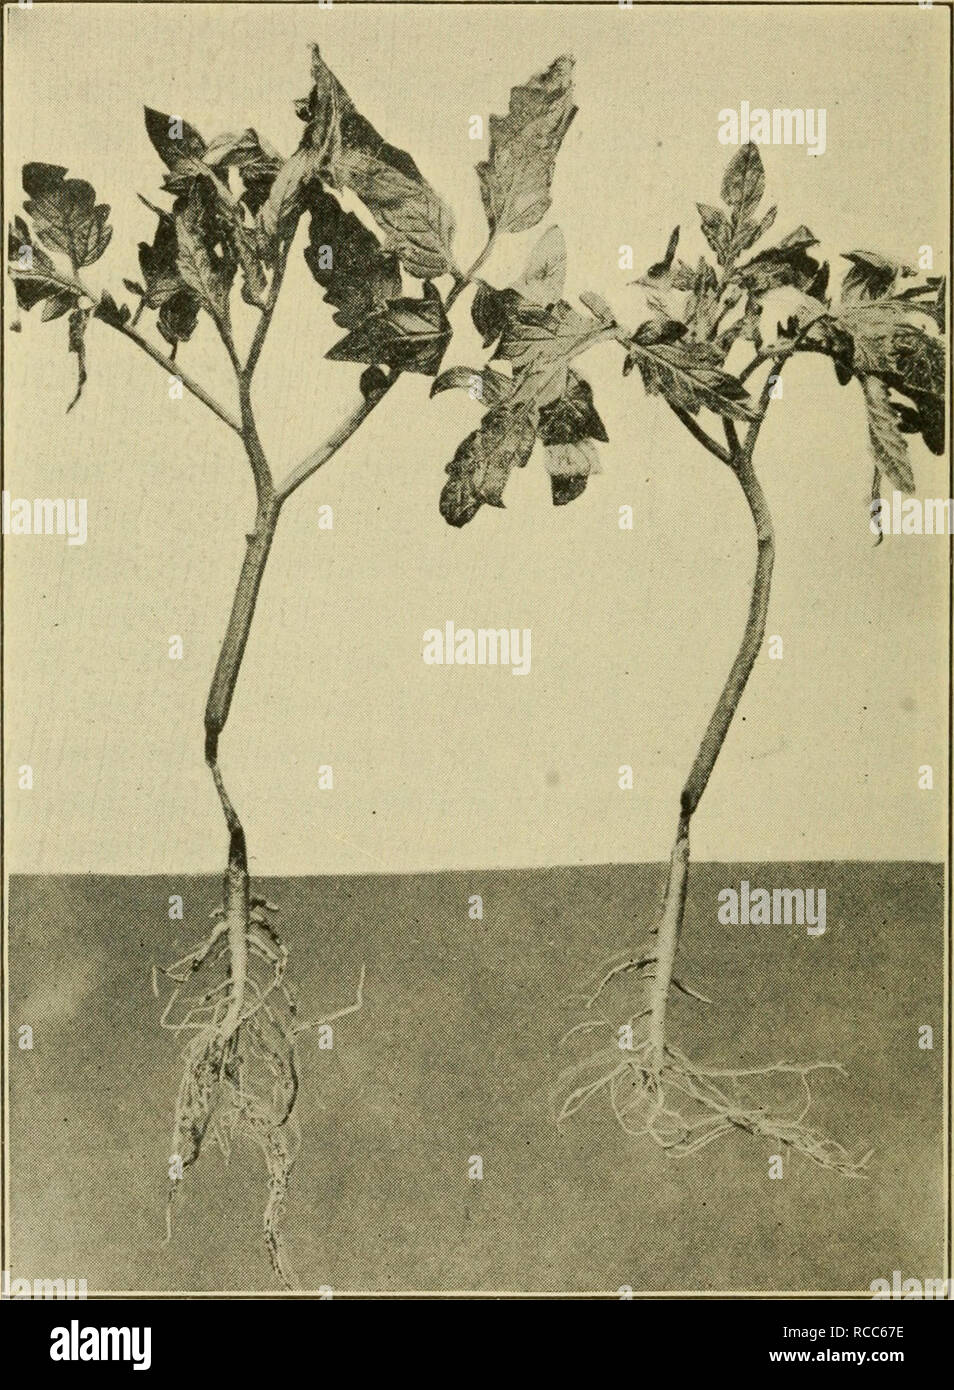 . Diseases of economic plants. Plant diseases. 20 Diseases of Economic Plants of fungi, prominent among them being Pythium, Thielavia, Corticium, Fusarium, Botrytis, Sclerotinia, Sclerotium, Phoma, Volutella, Phytophthora, CoUetotrichum, Gloeospo-. FiG. 4. — Stems of young greenhouse tomato plants damped- off frcm attacks of Corticium. After Humbert. rium. The fungus which causes this condition ma}^ often be seen as a weft of myceHum around the base of the diseased plant, or even creeping over the ground to some distance.. Please note that these images are extracted from scanned page images th Stock Photo